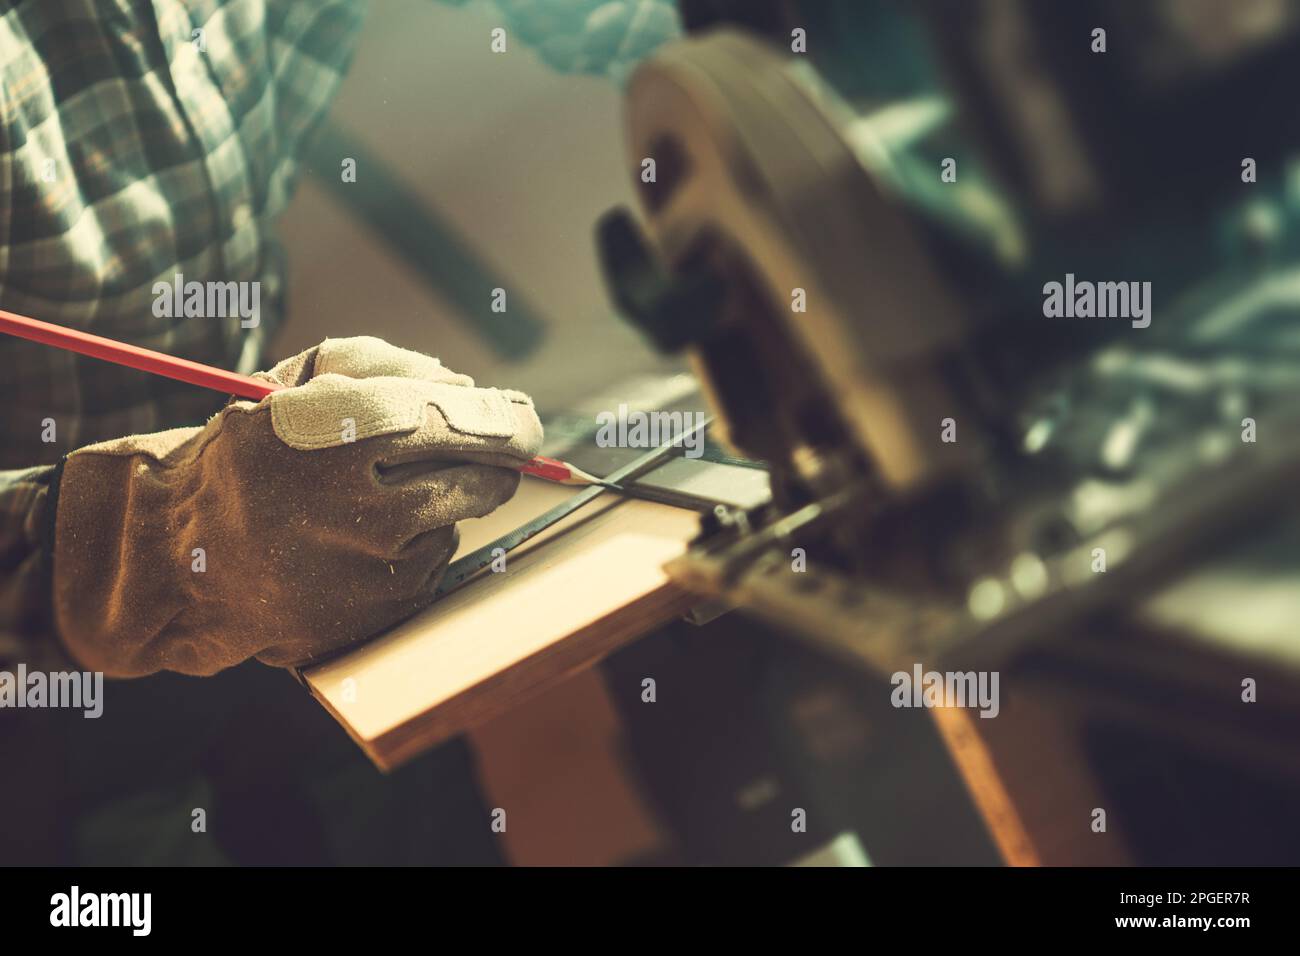 Man Measuring and Marking Piece of Wood Using Pencil To Cut Inside His Workshop. Close Up Photo. Stock Photo